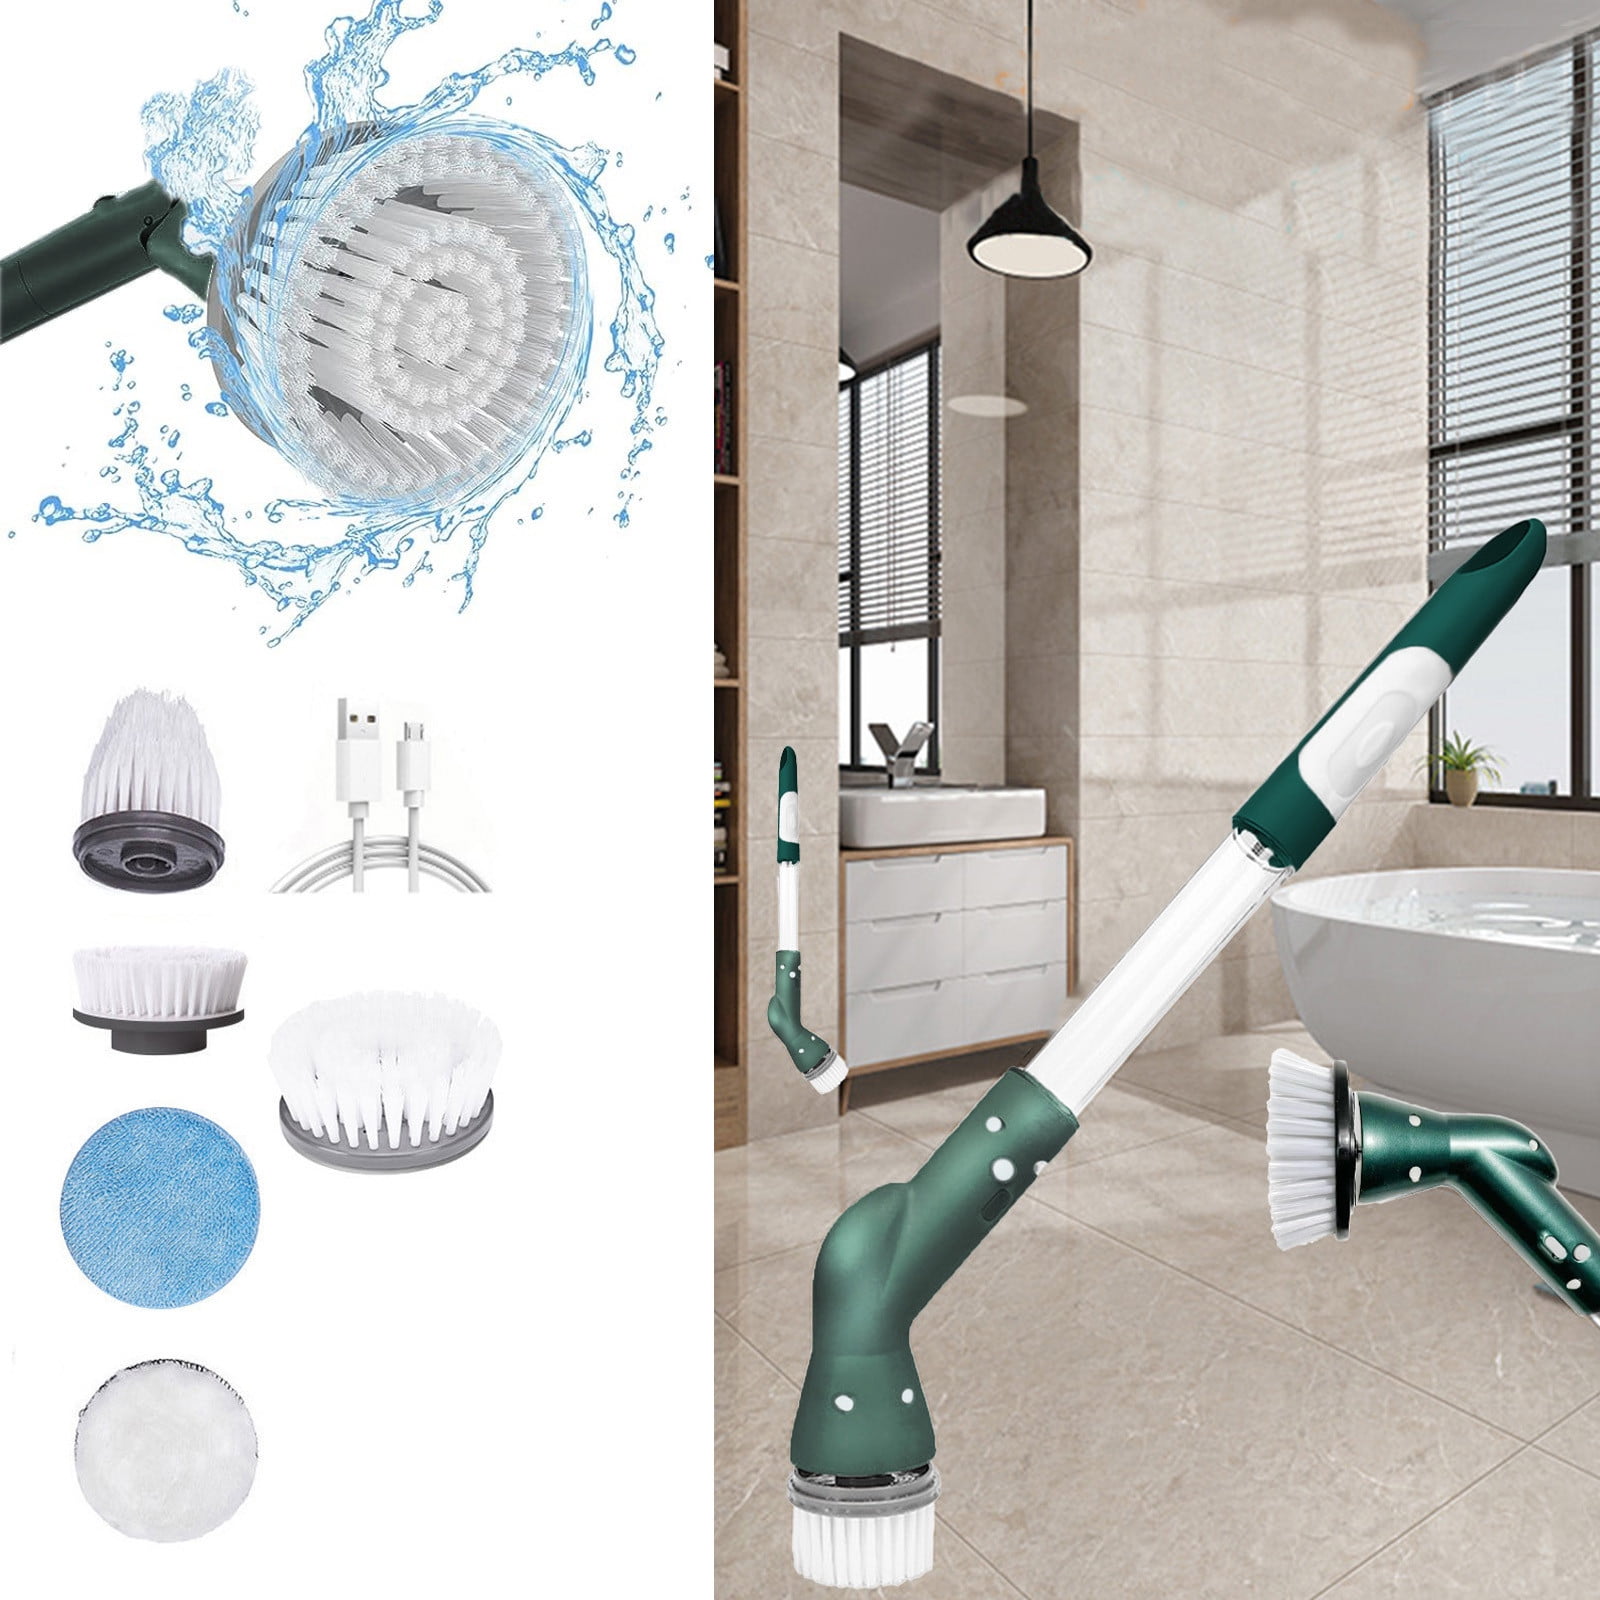 This Electric Scrubber That Saves Time Has Double Discounts at